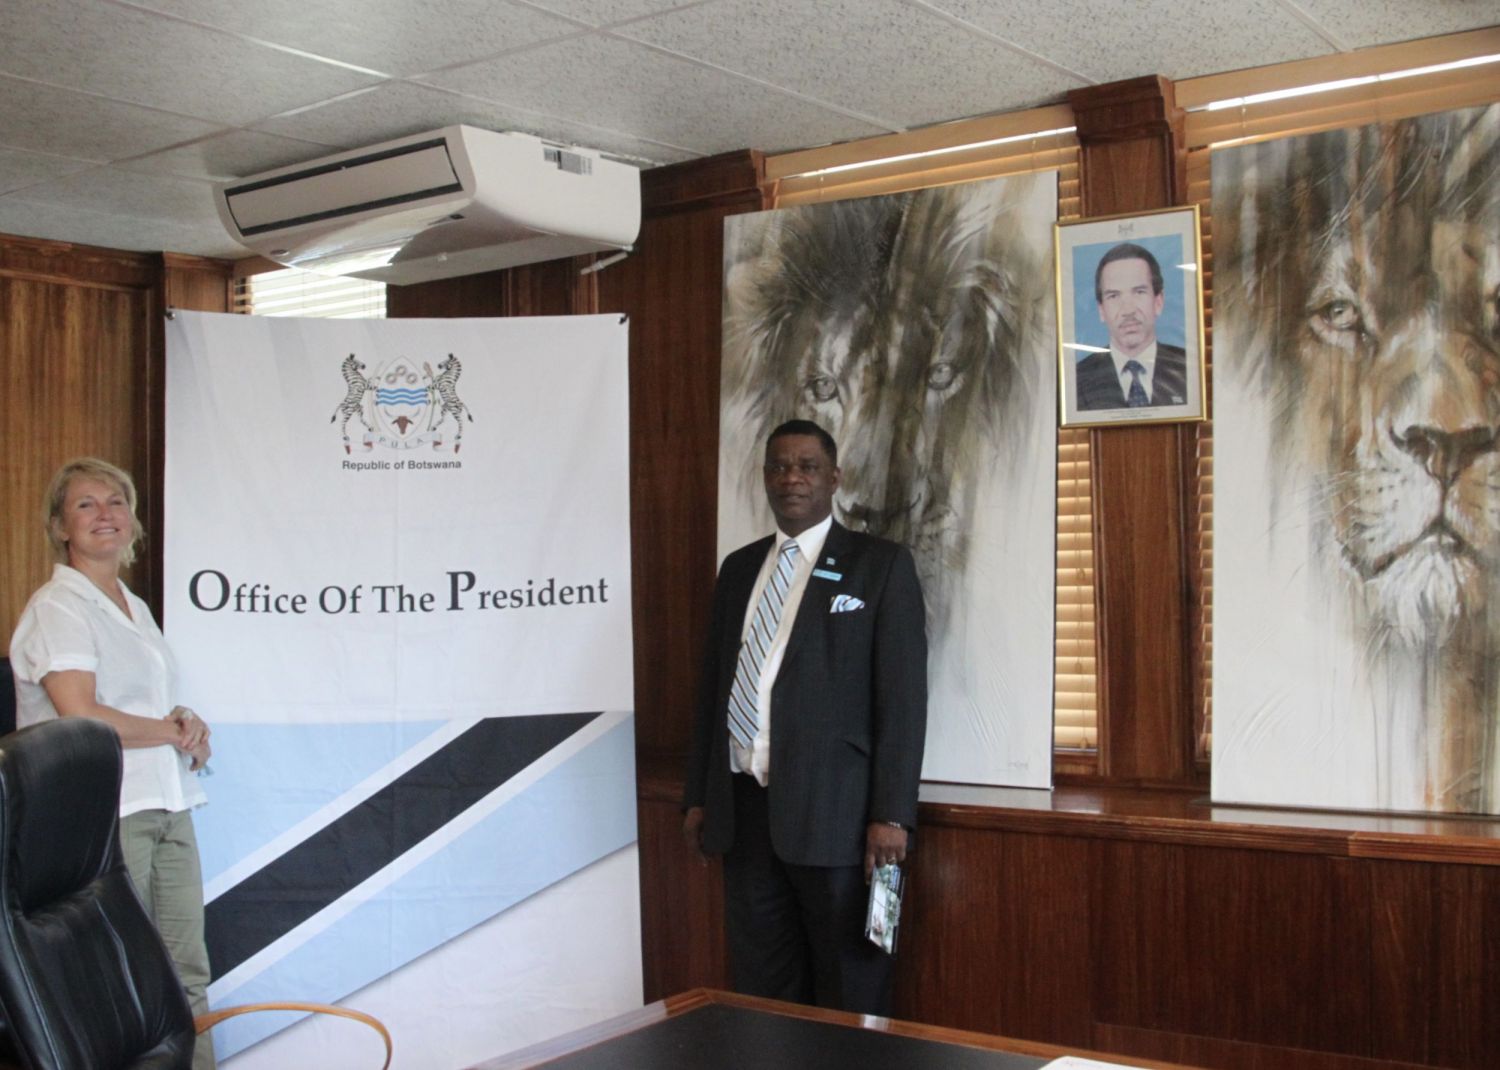 Meeting with Botswana's top officials was pretty nerve-racking.